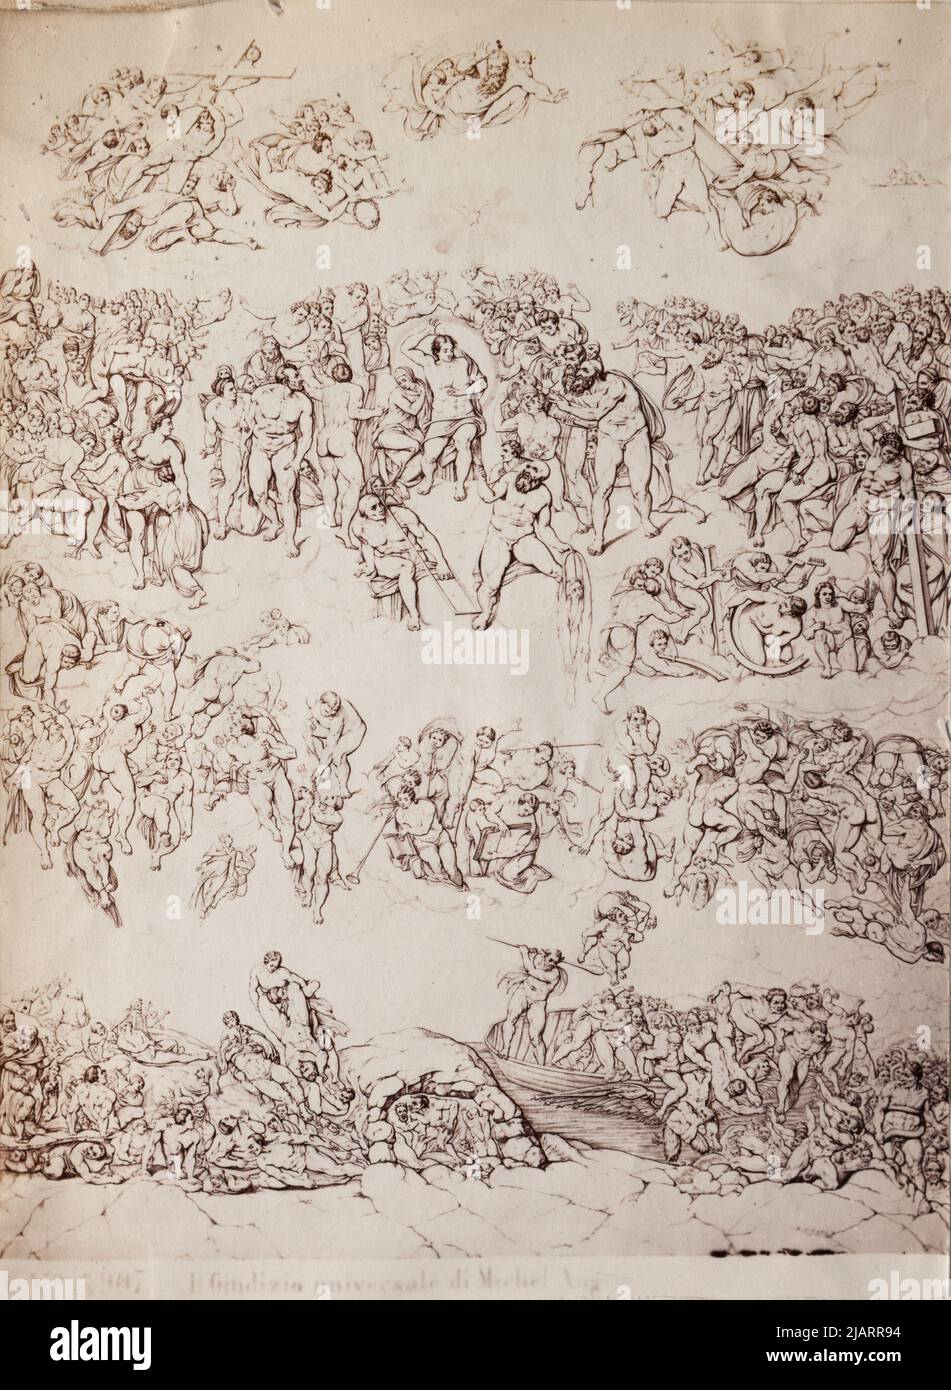 ROME  The Sistine Chapel  The Last Judgement  drawing sketch for a polychrome by Michelangelo Buonarotti Summer, Giorgio (Georg) (1834 1914) Stock Photo